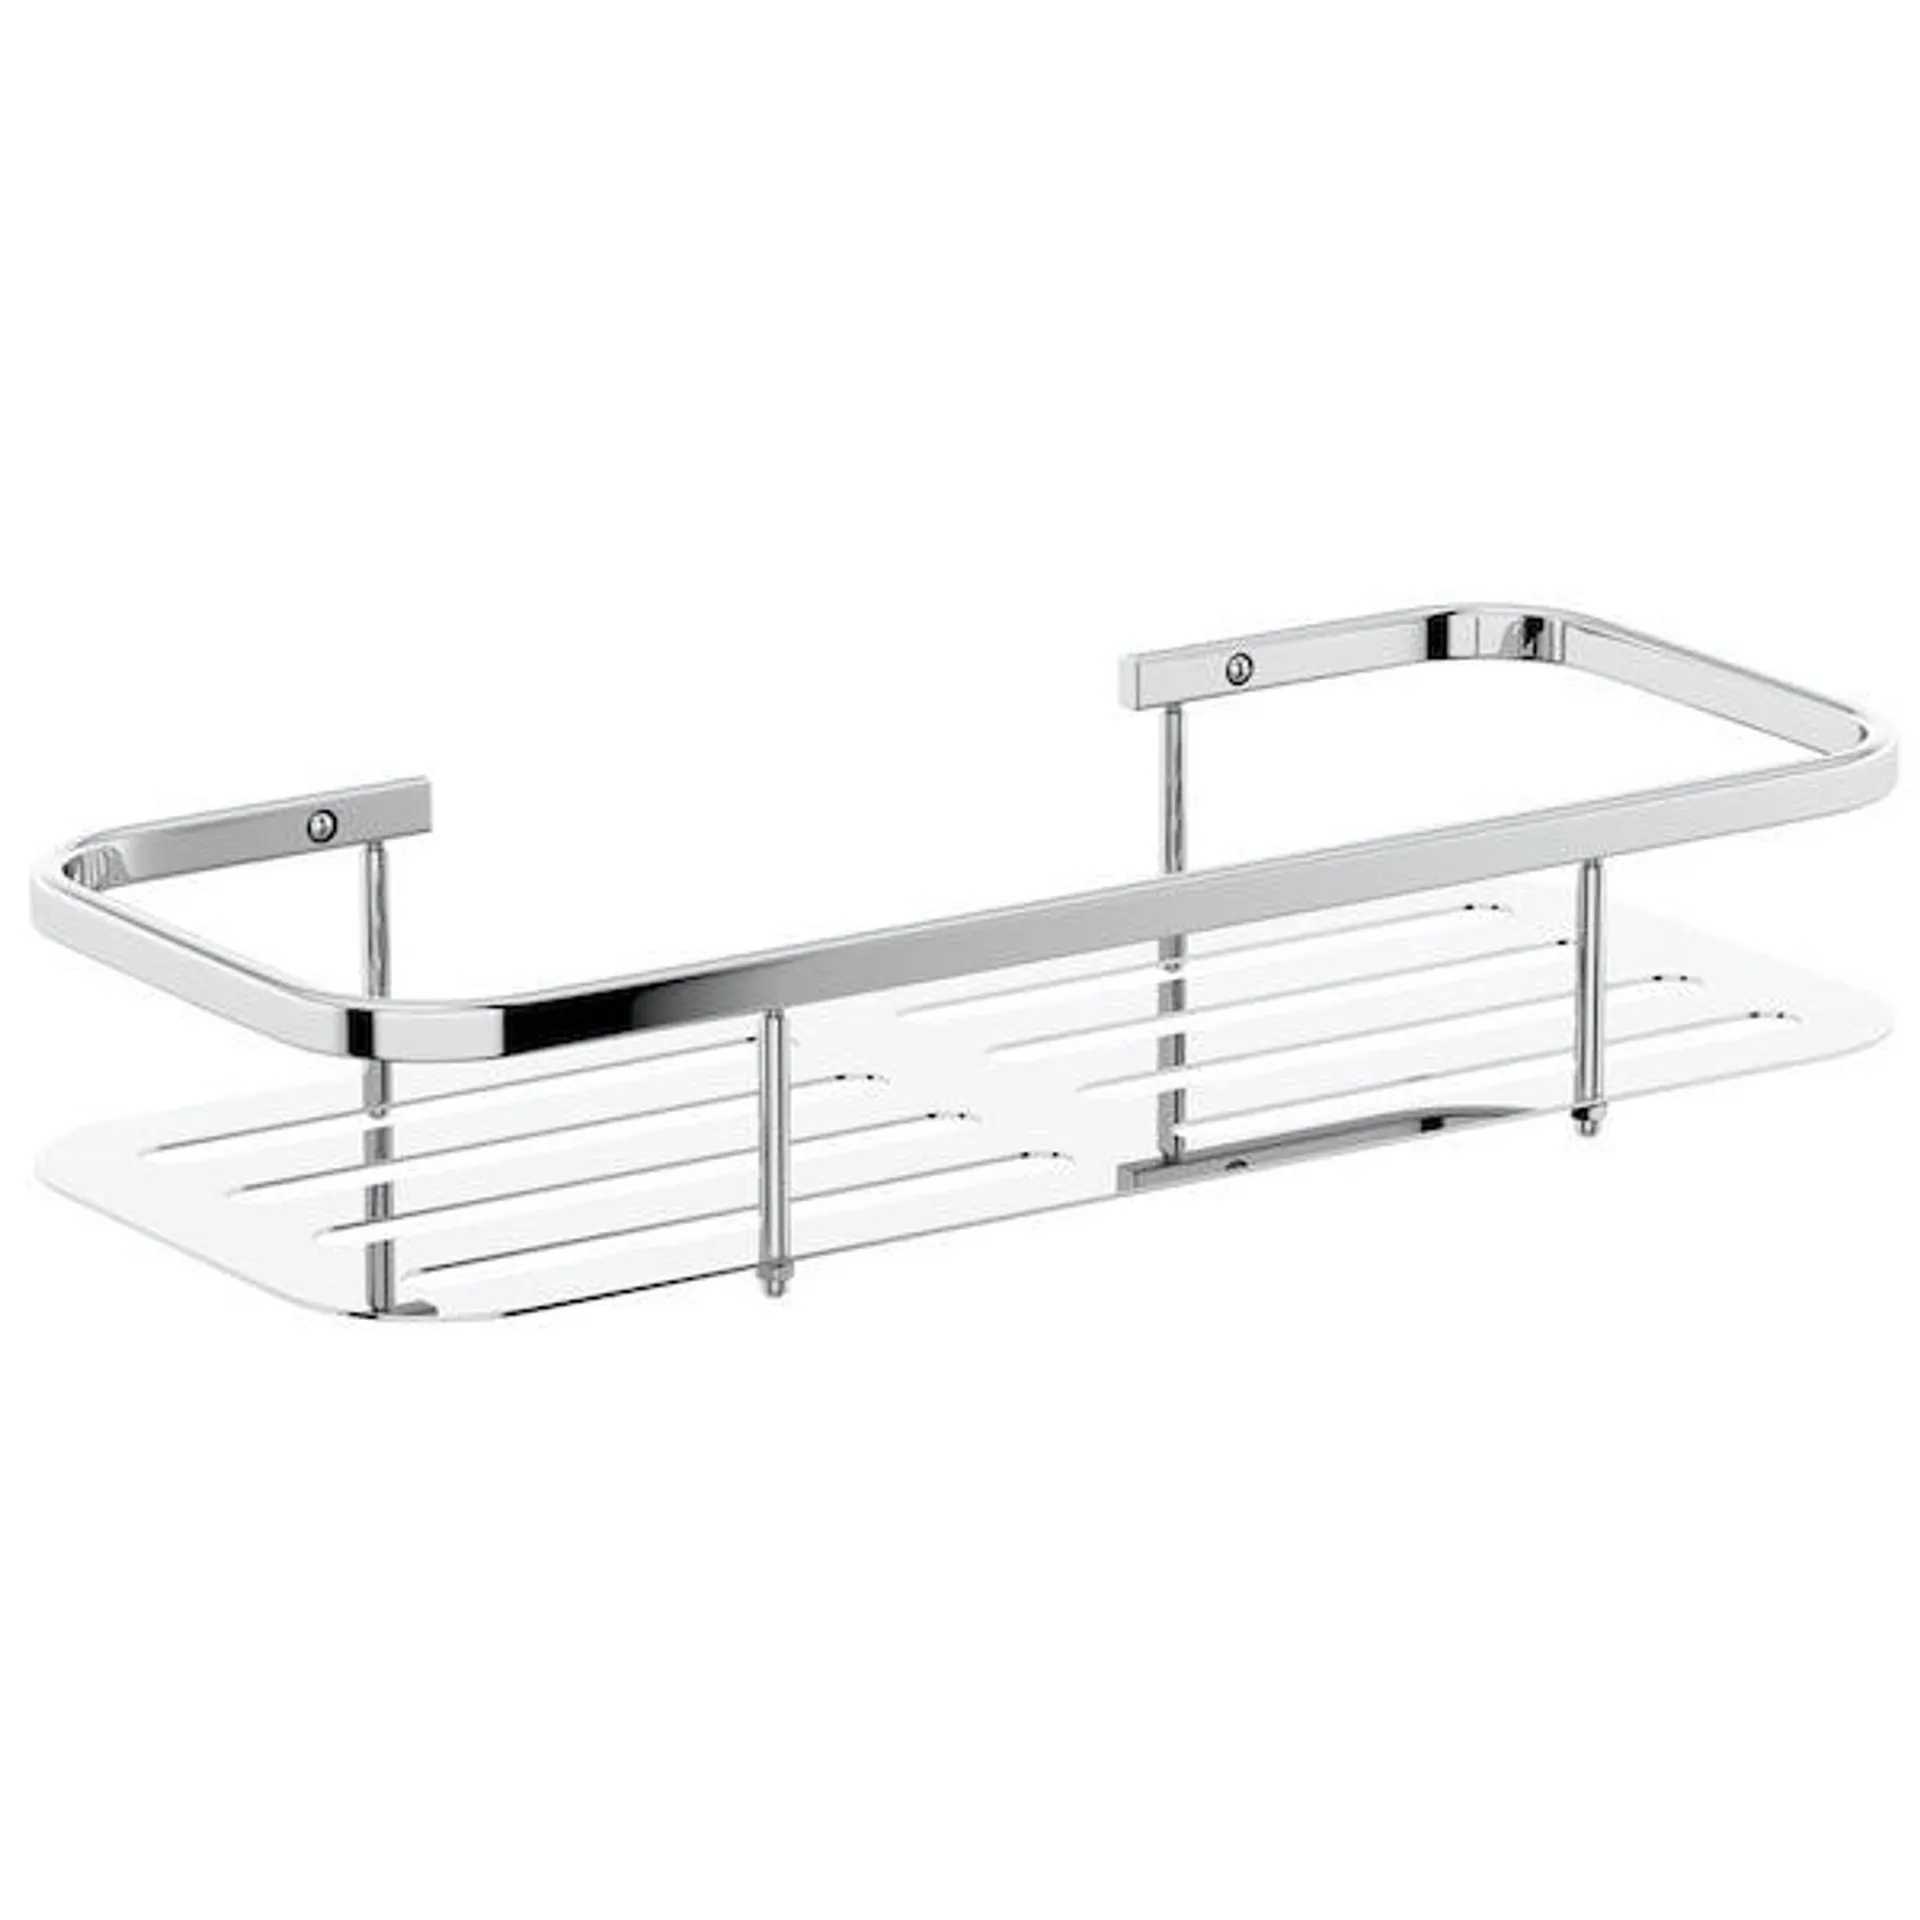 Accents Options square shower caddy